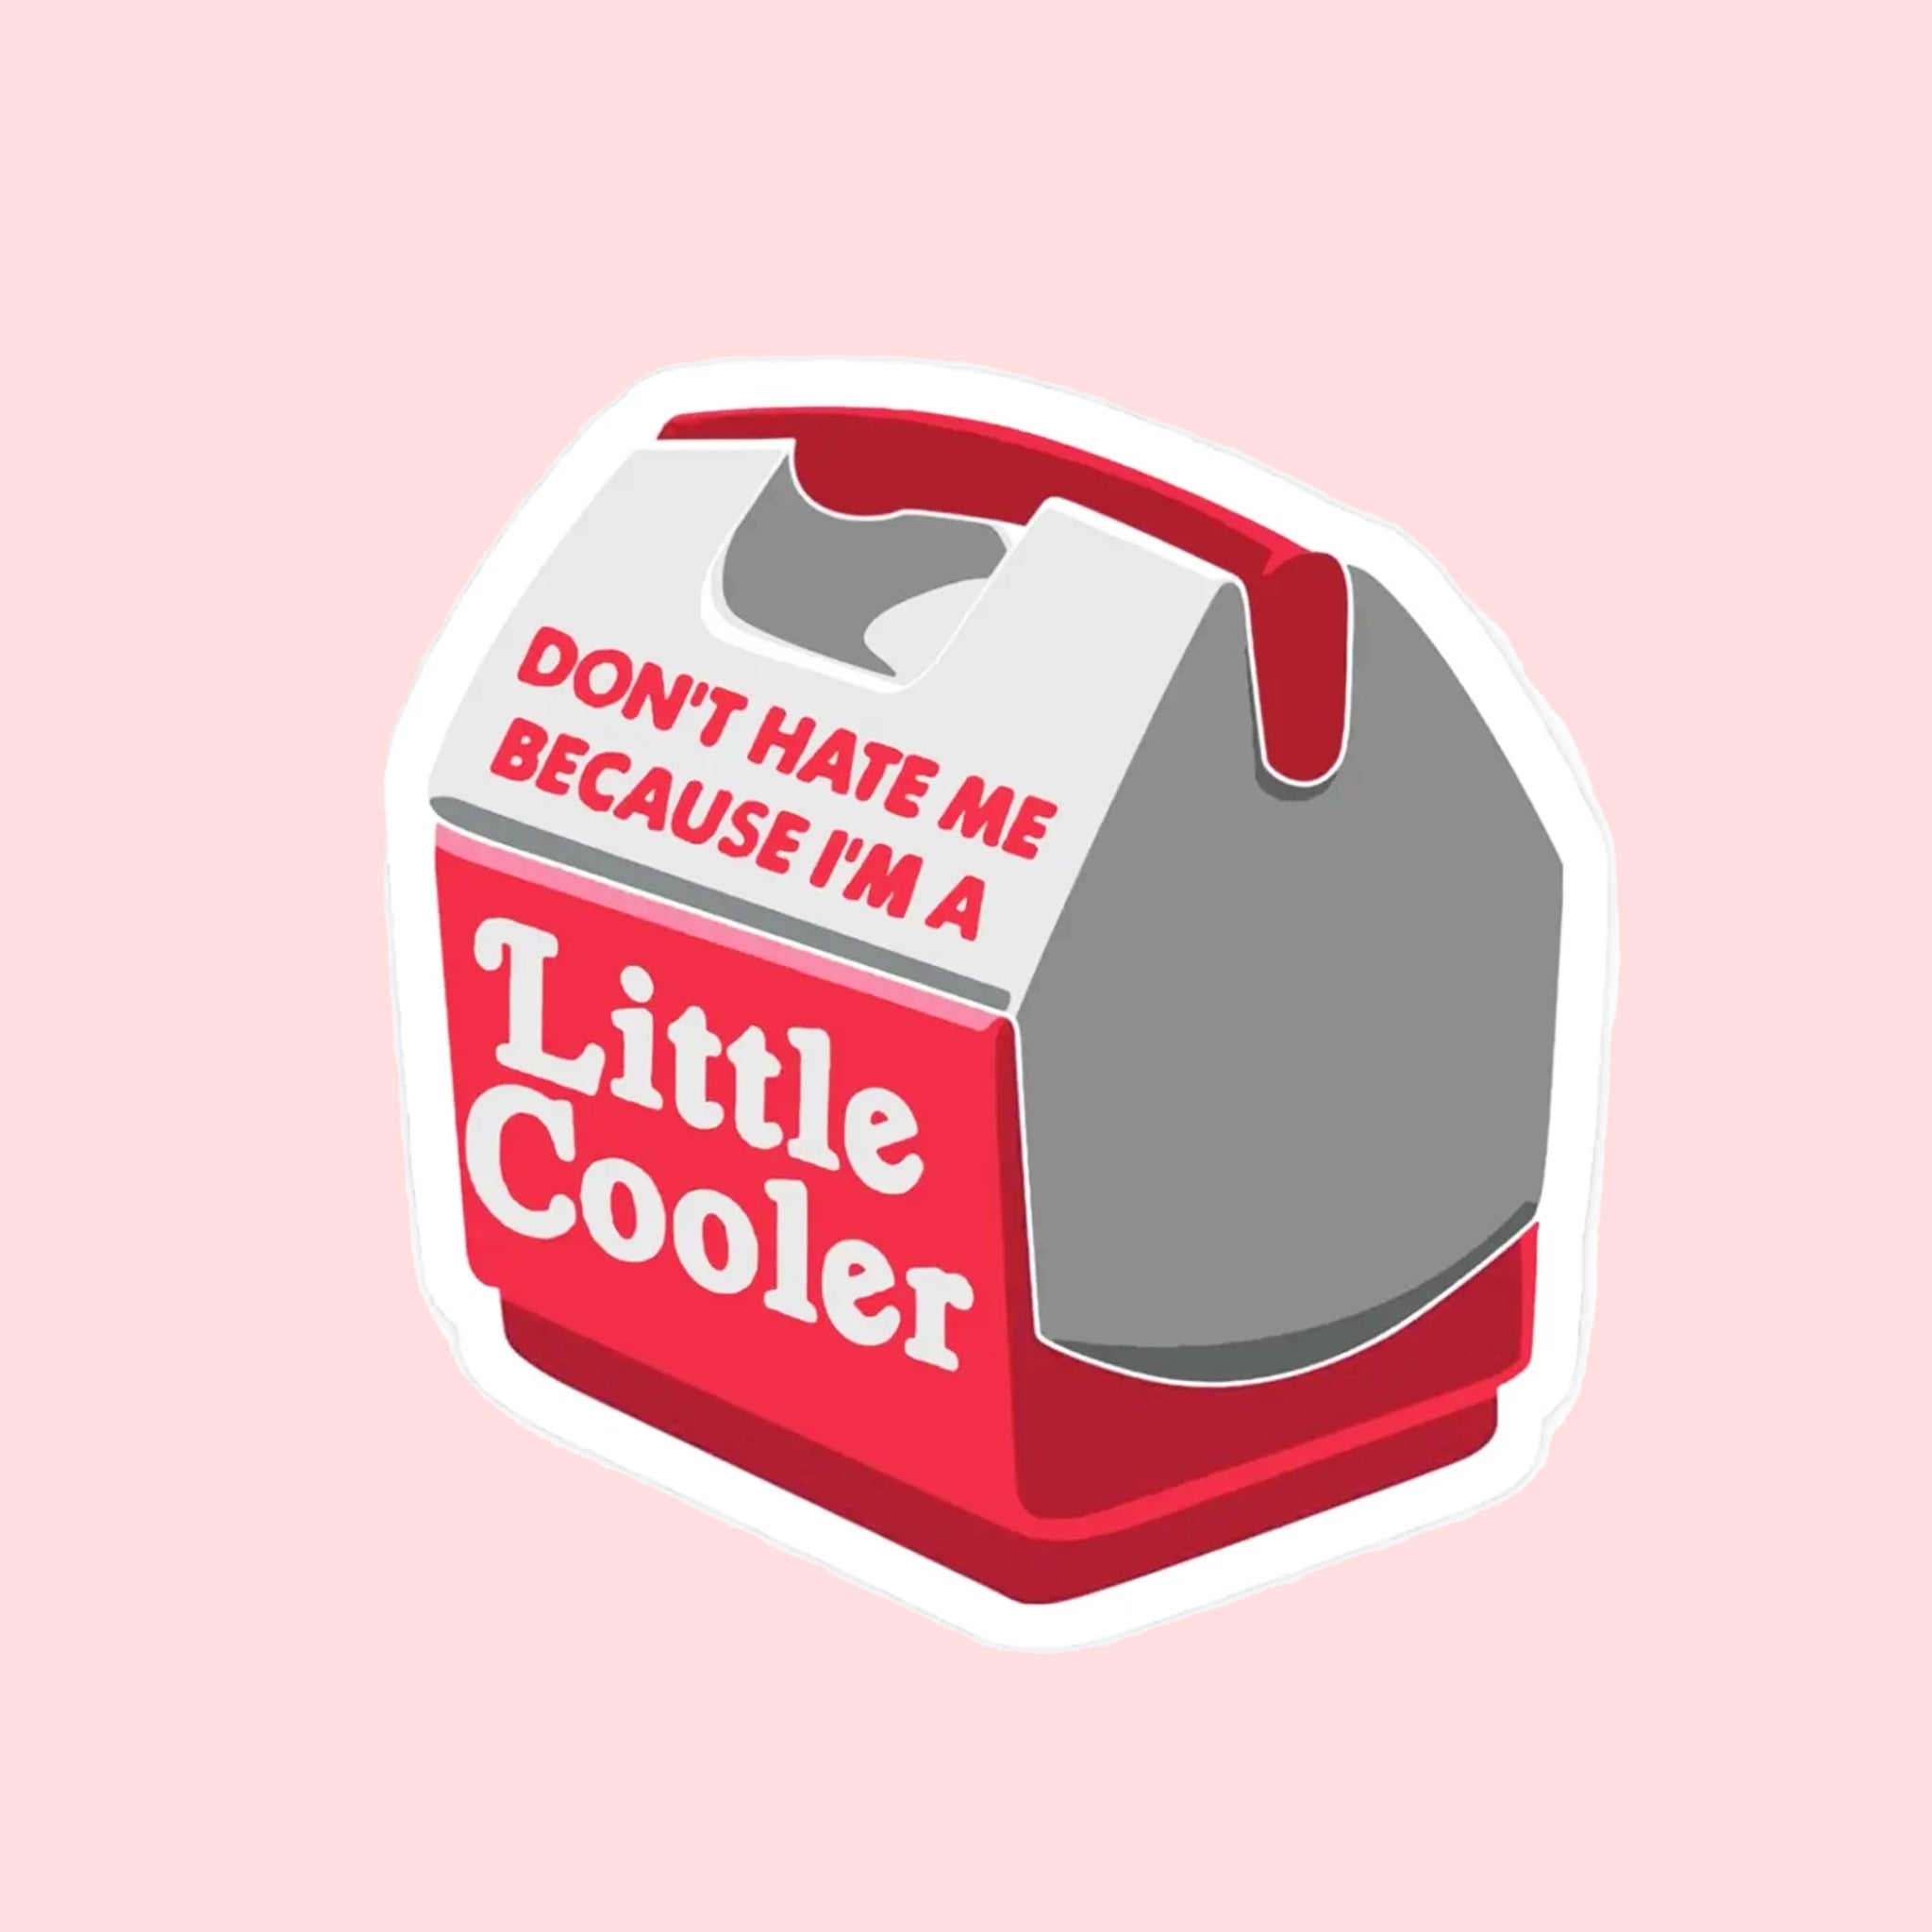 On a light pink background is a red and white sticker in the shape of a cooler with text that reads, "Don't Hate Me Because I'm A Little Cooler".